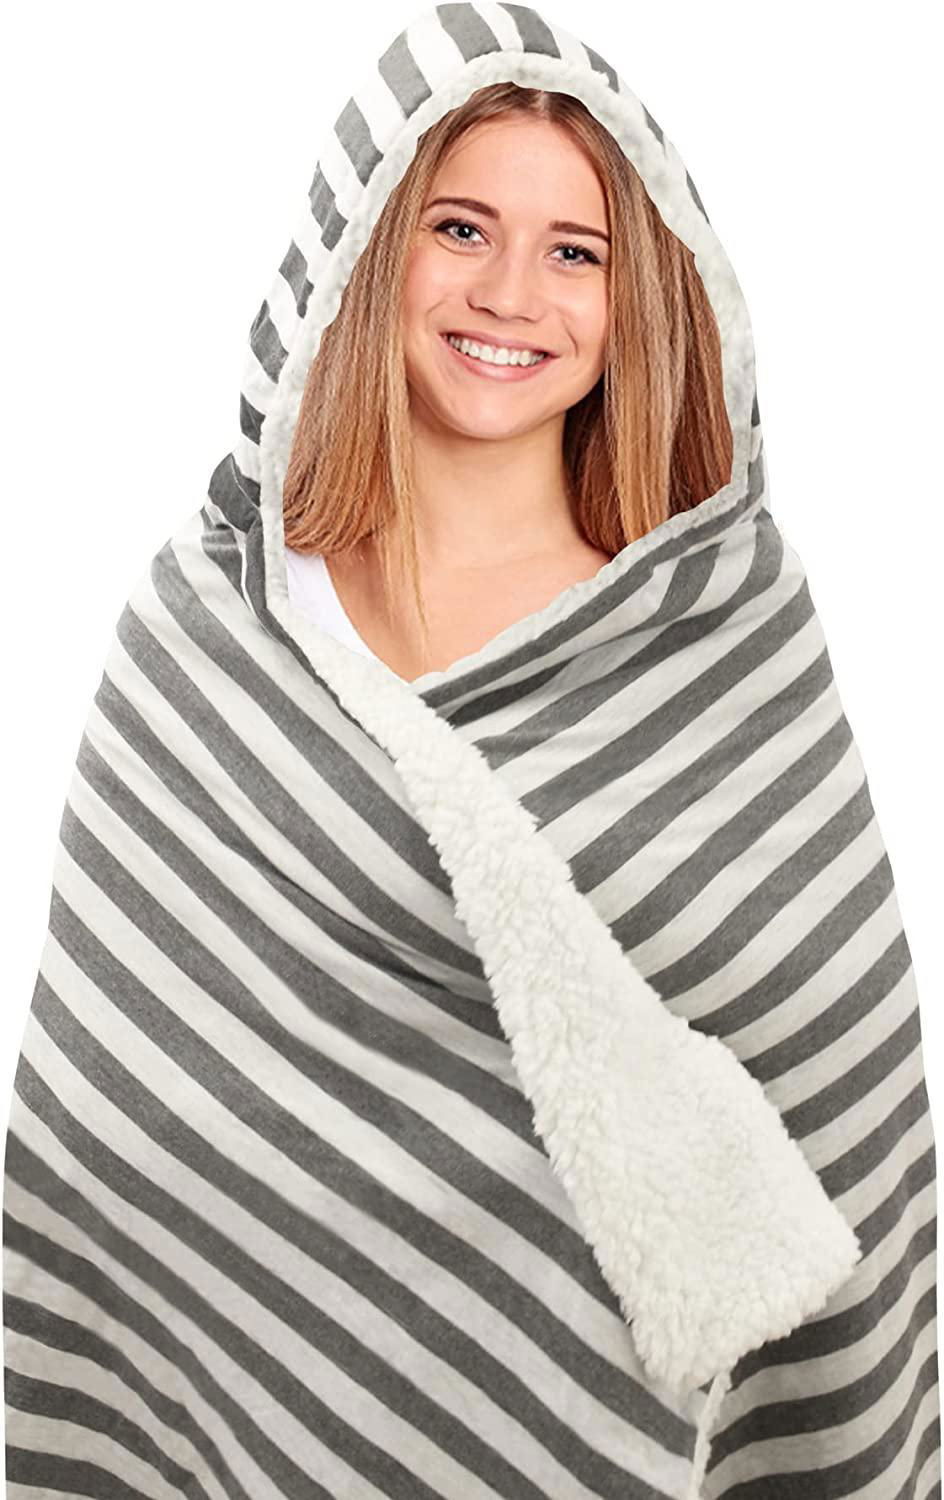 New Cotton Blend Jersey Knit Soft Reversible Sherpa Throw Hooded Blanket